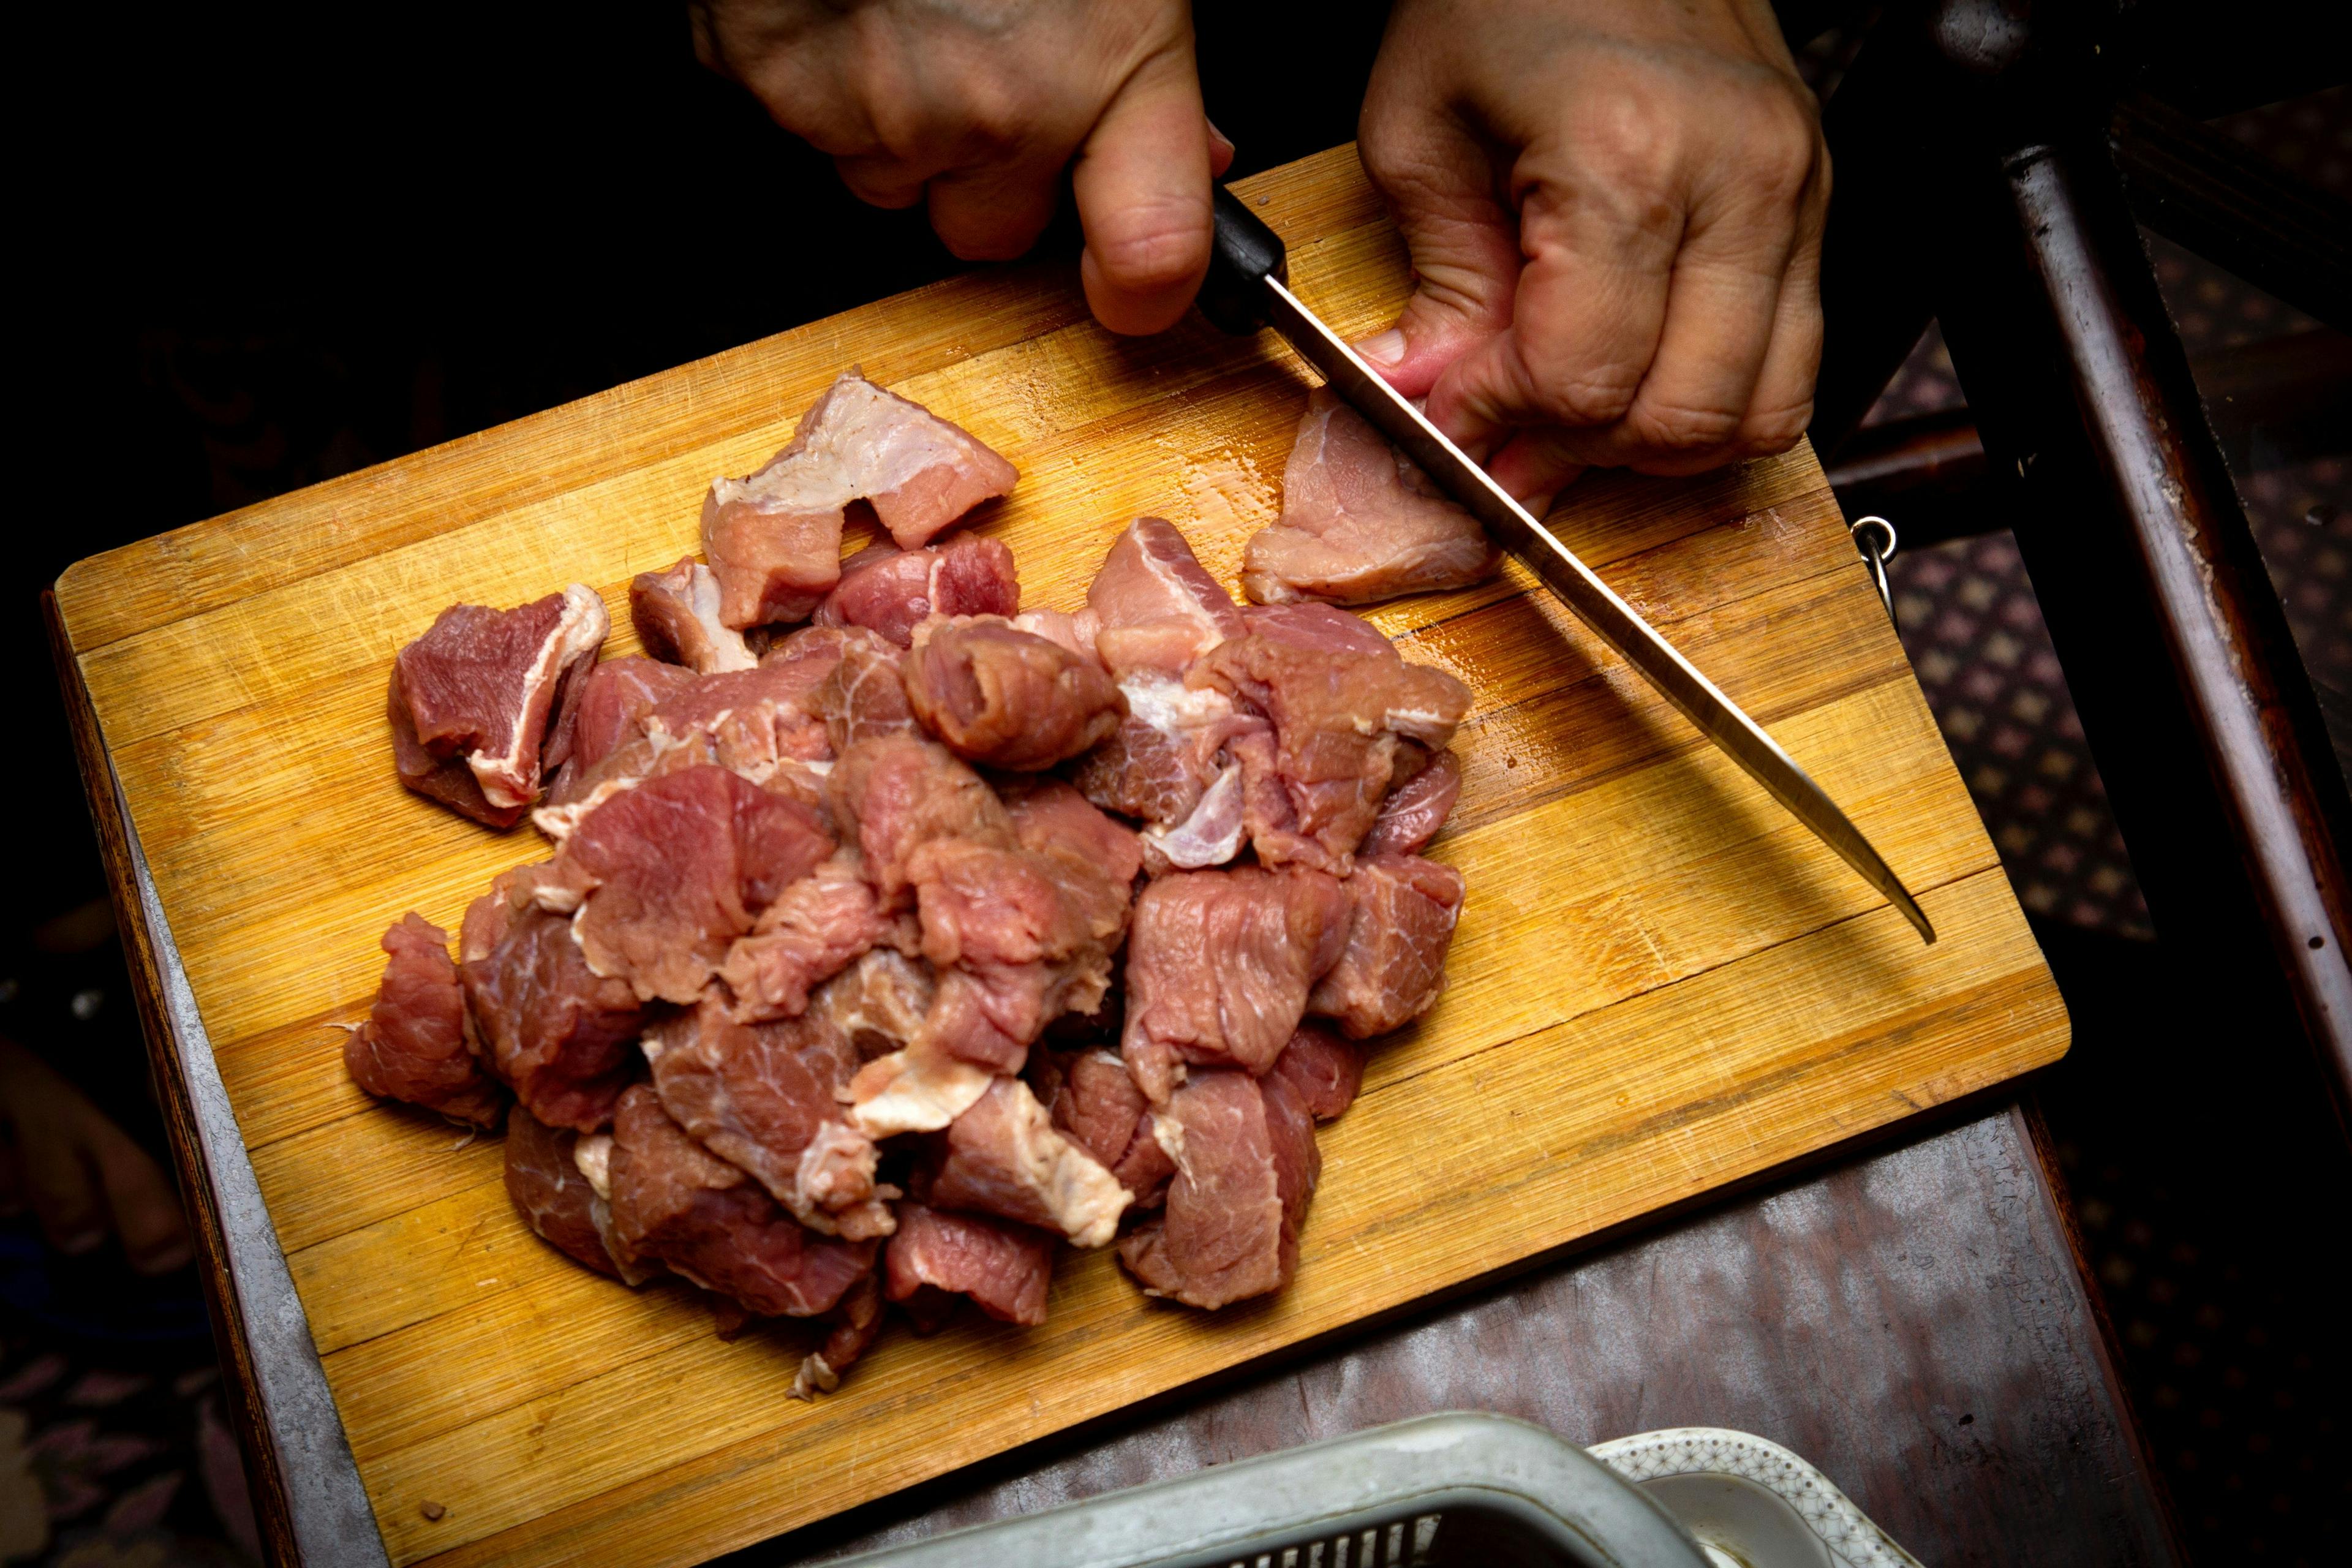 Red Meat, Alcohol Consumption May Increase Risk of Colon Cancer